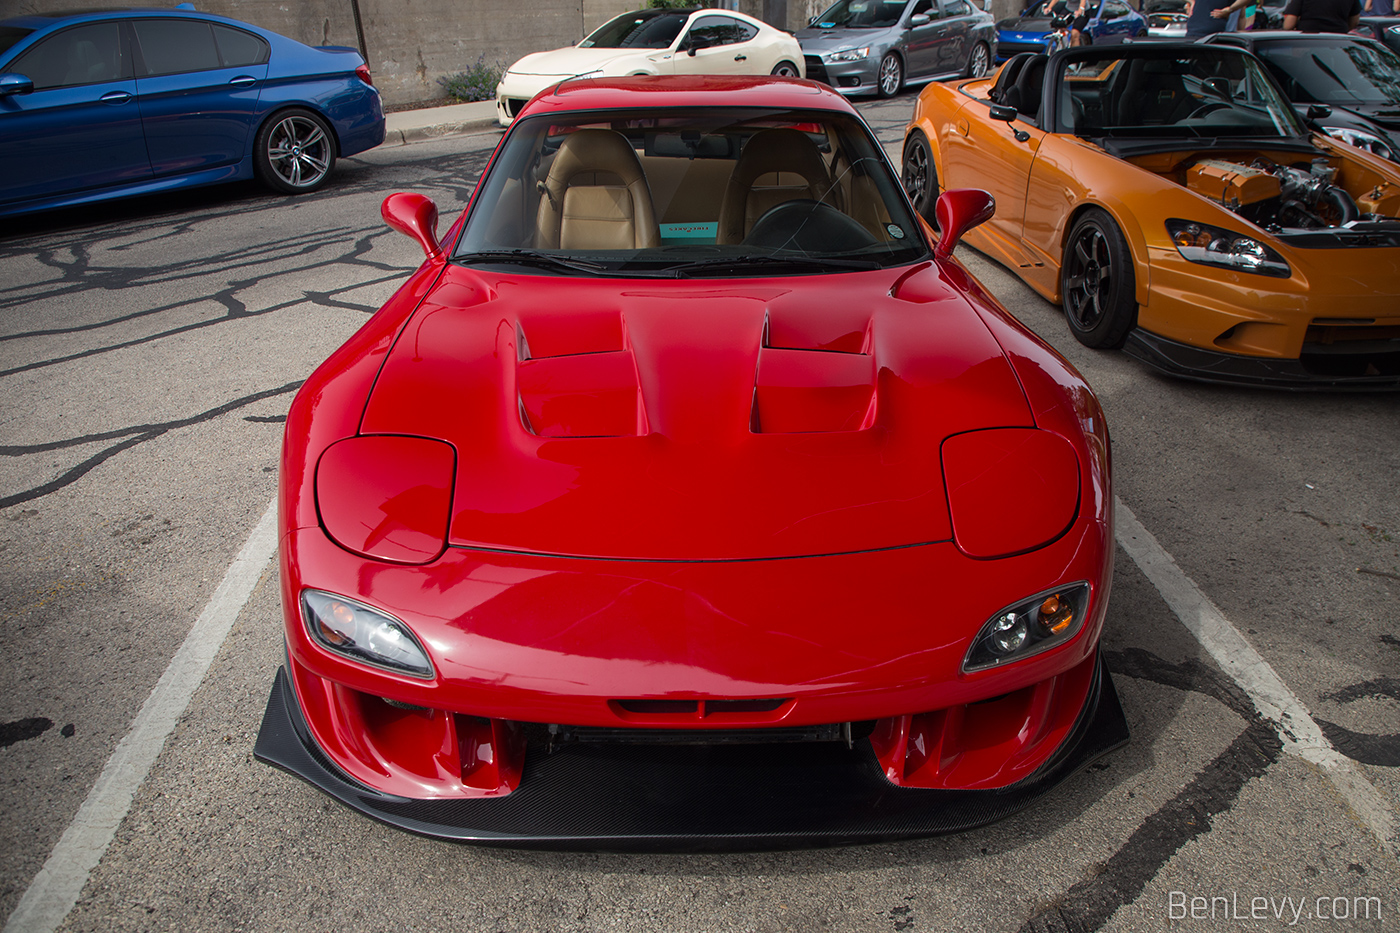 Red FD RX-7 with Vented Hood